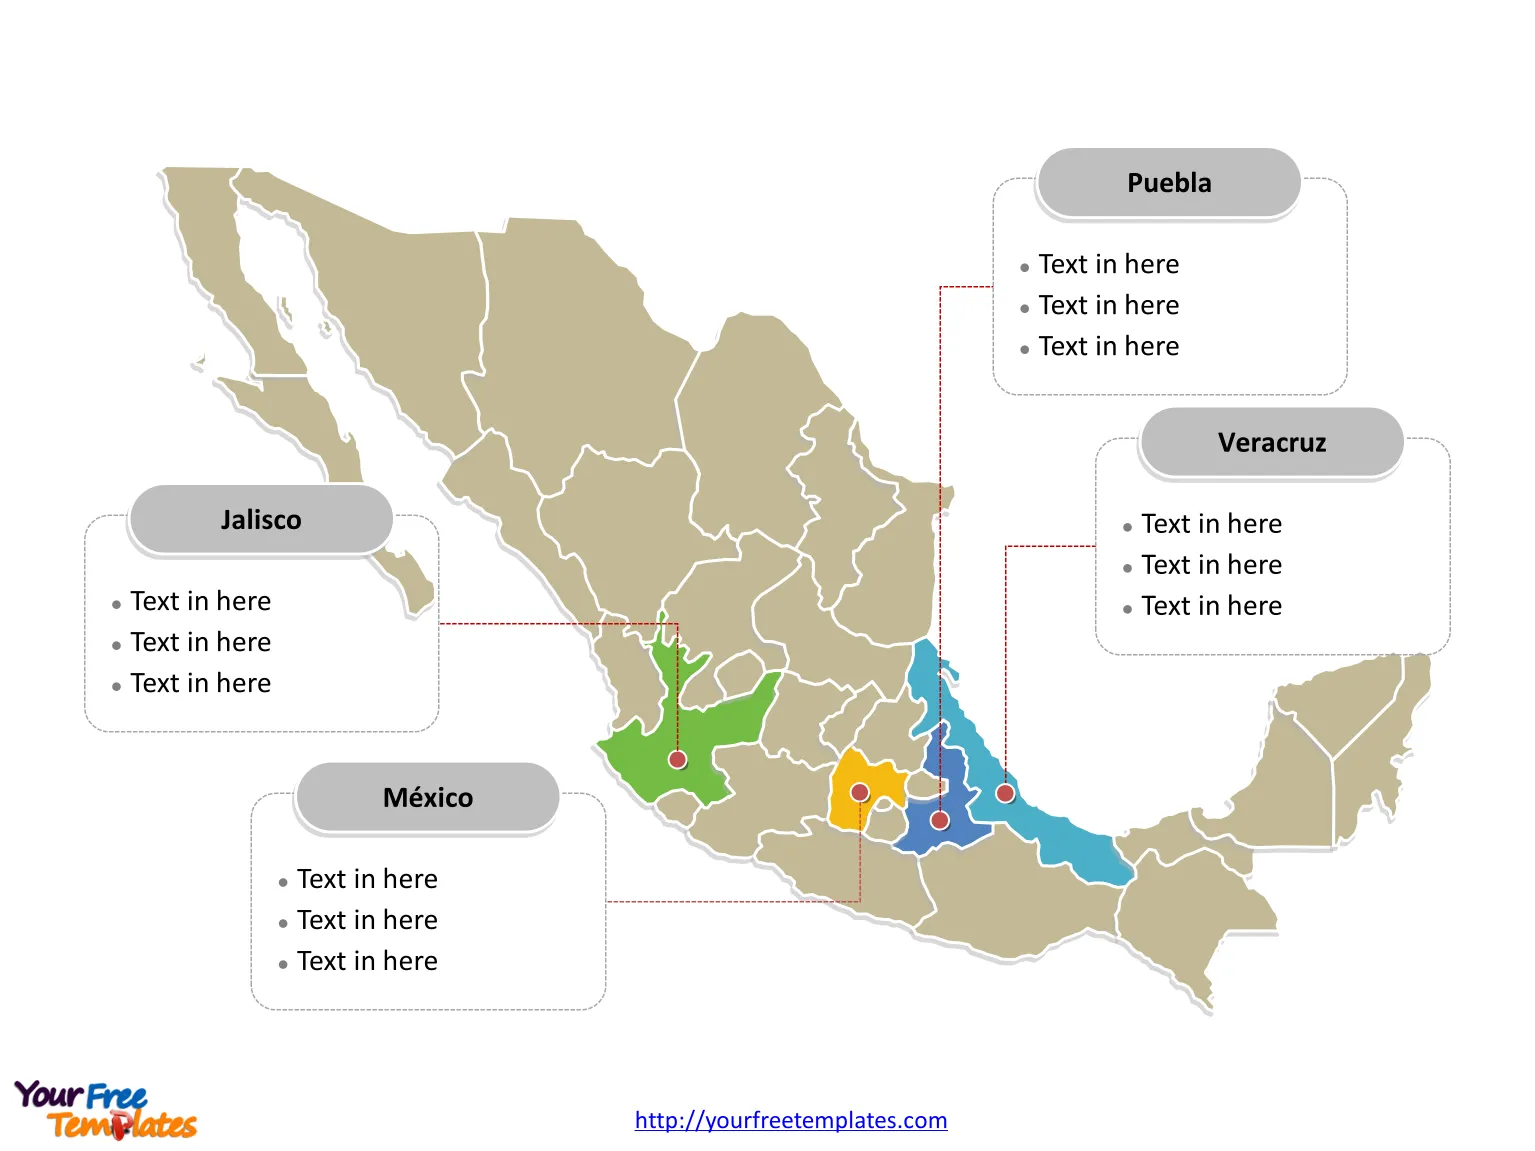 Mexico PowerPoint map label with major administration districts